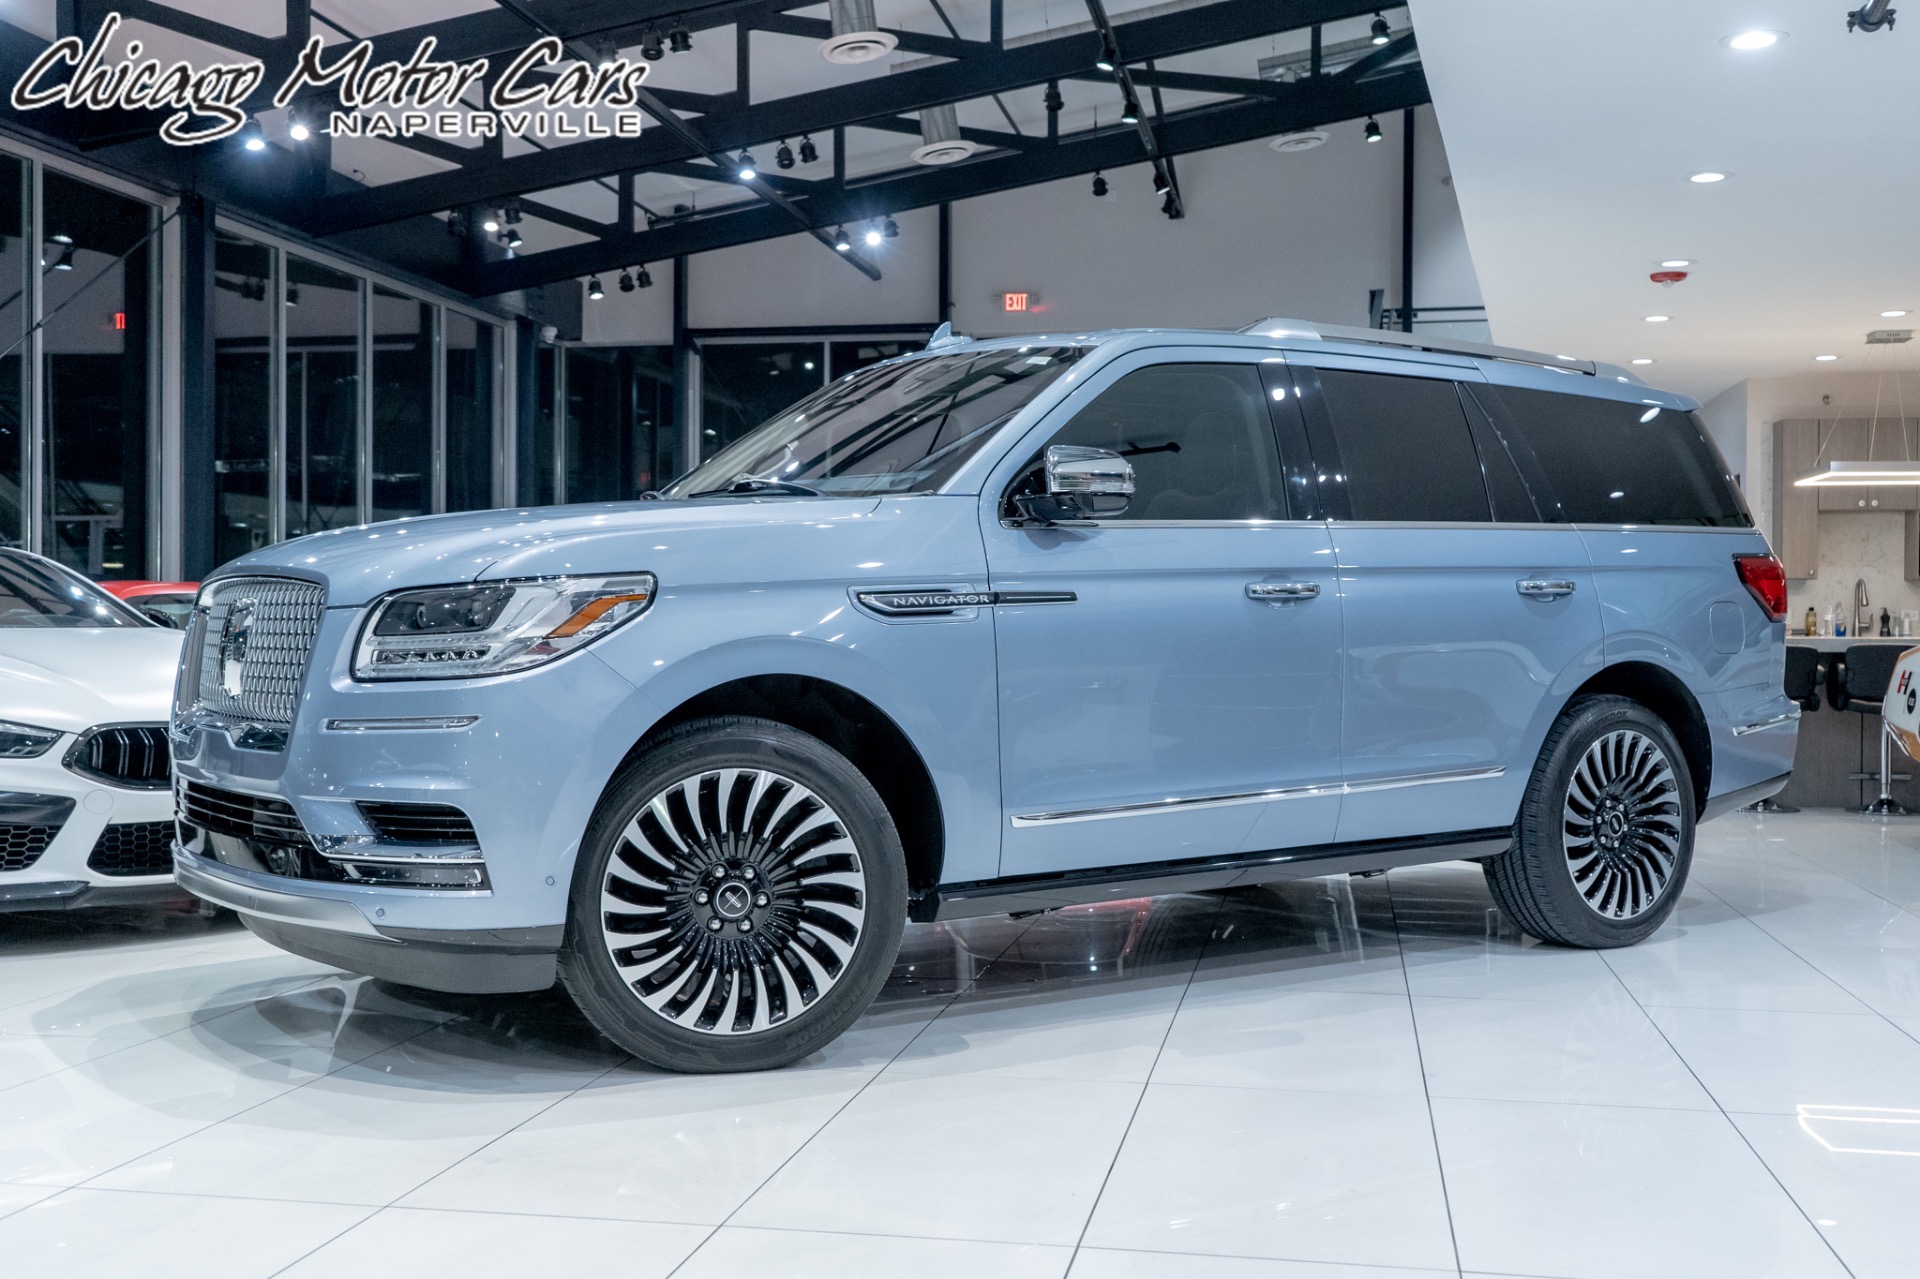 Used 2018 Lincoln Navigator Black Label SUV Top Of The Line Model